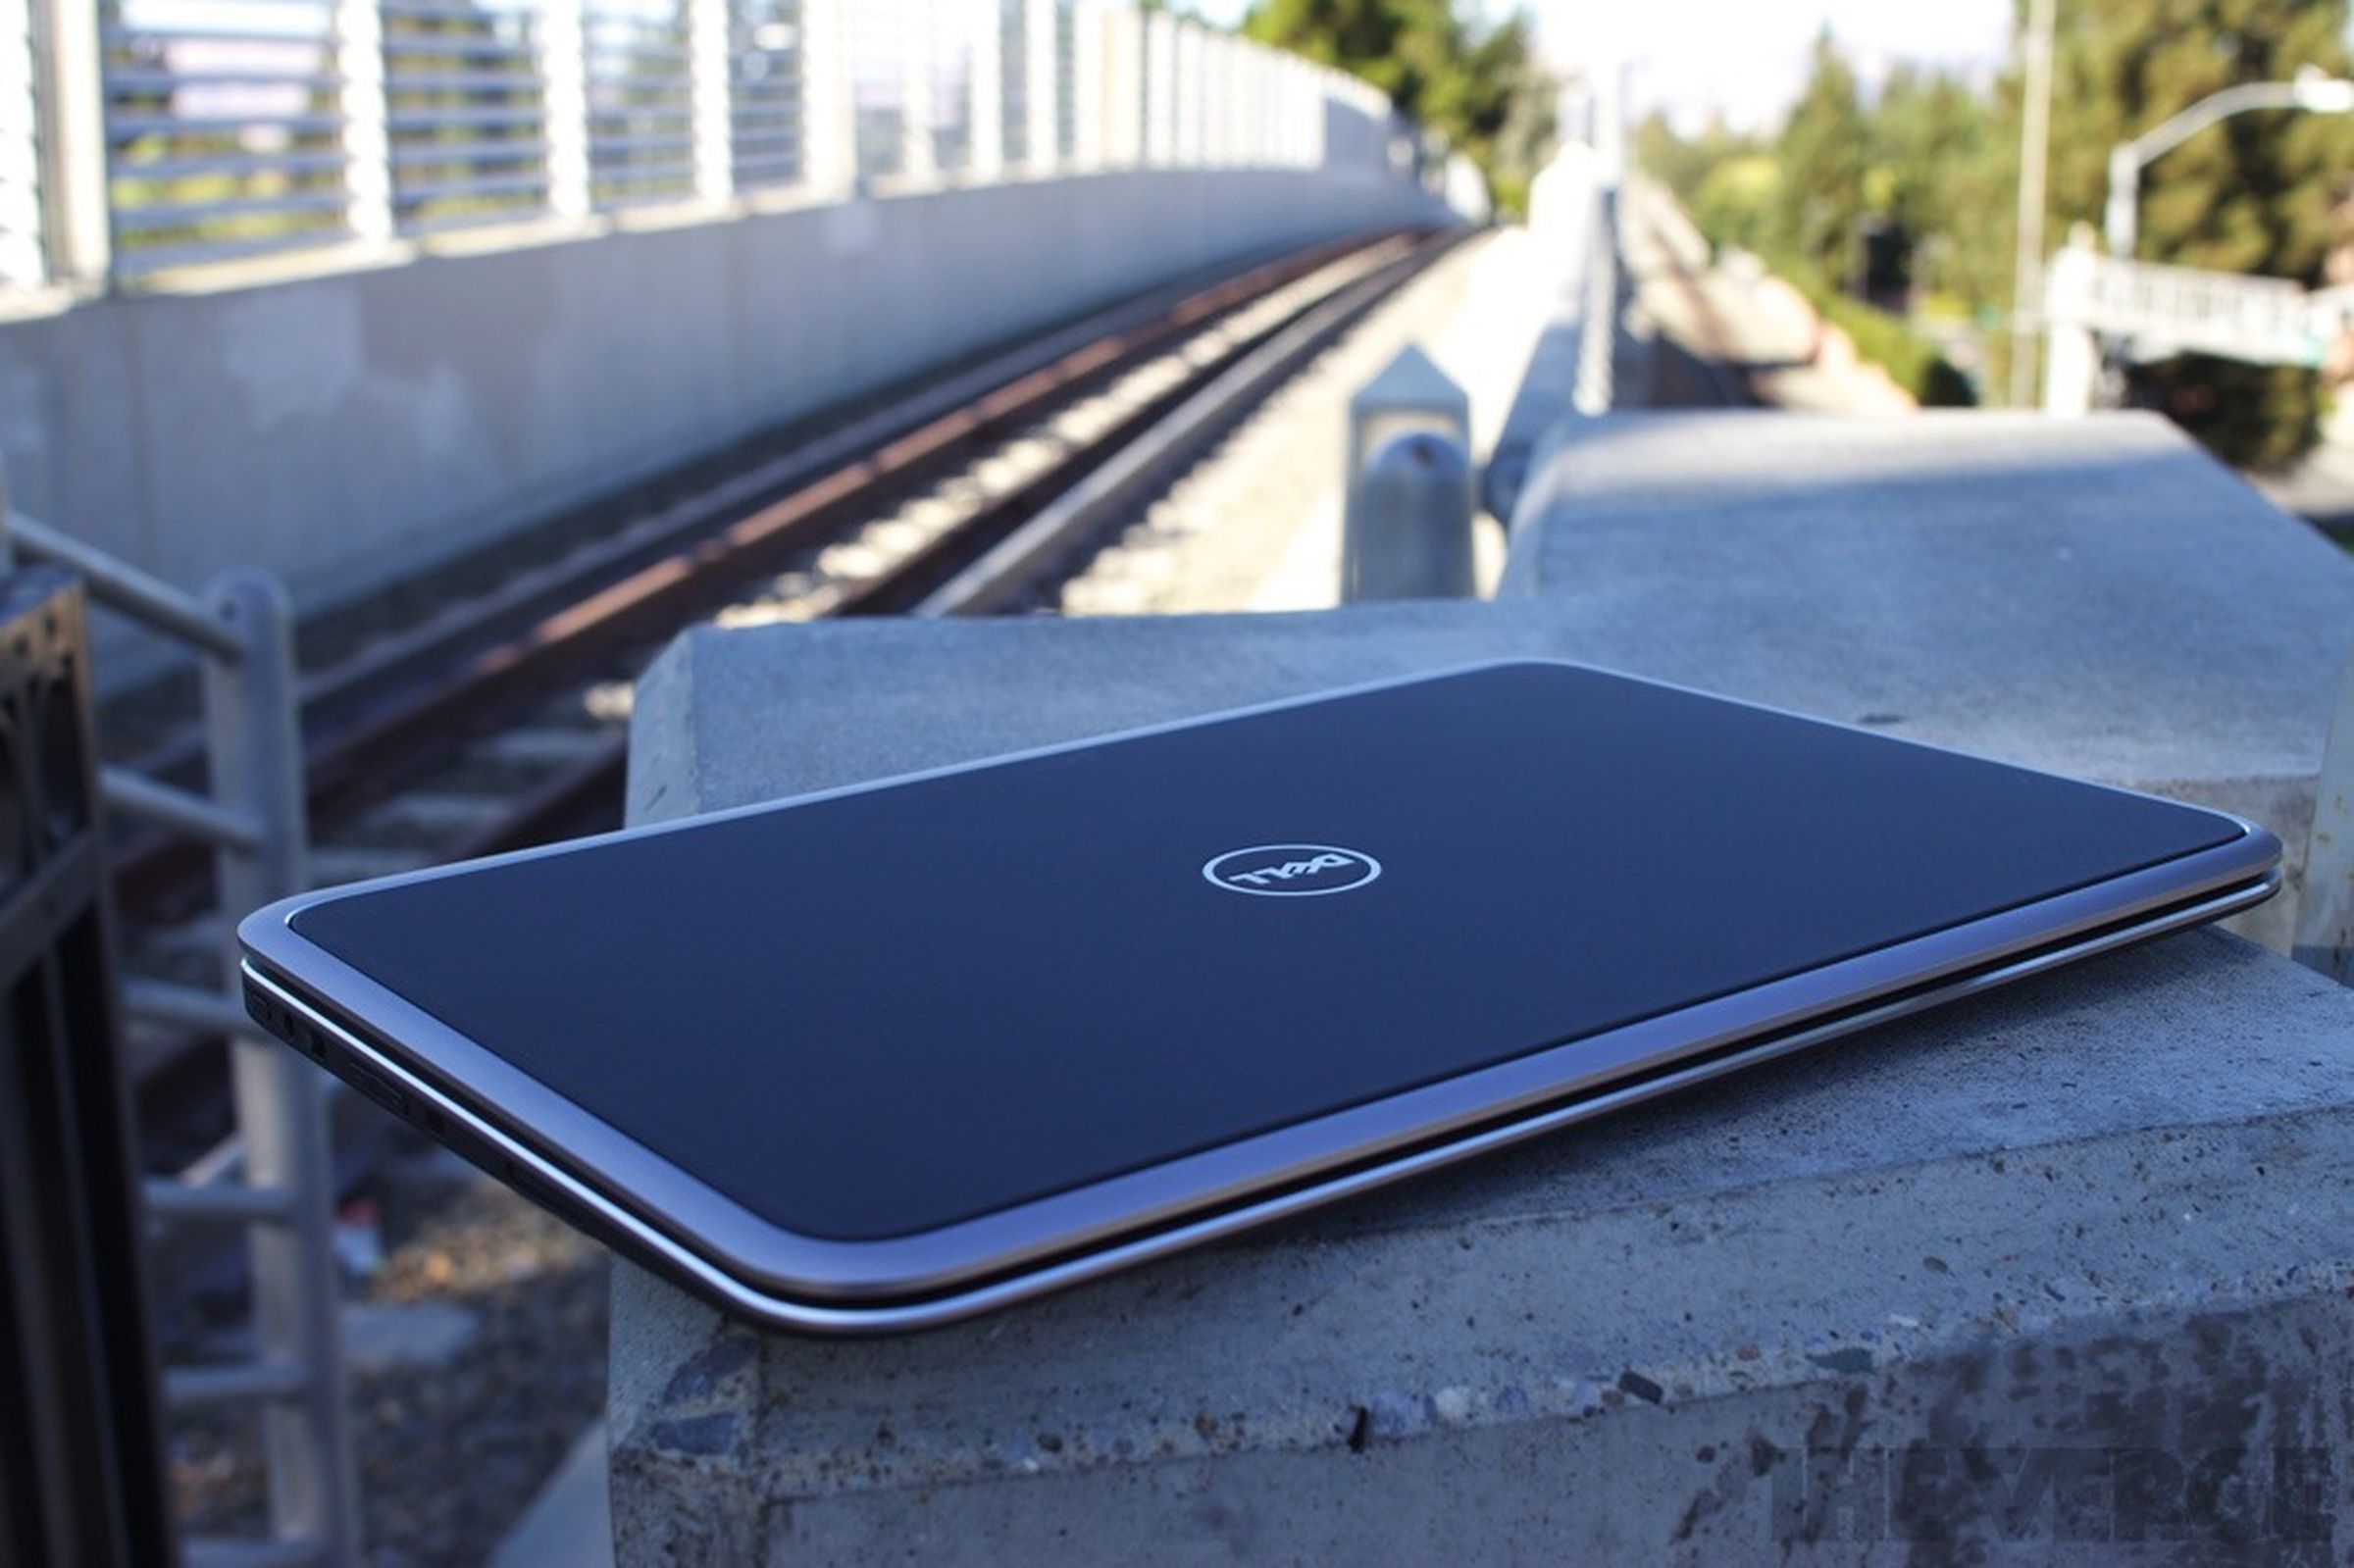 Dell XPS 12 (2013) pictures